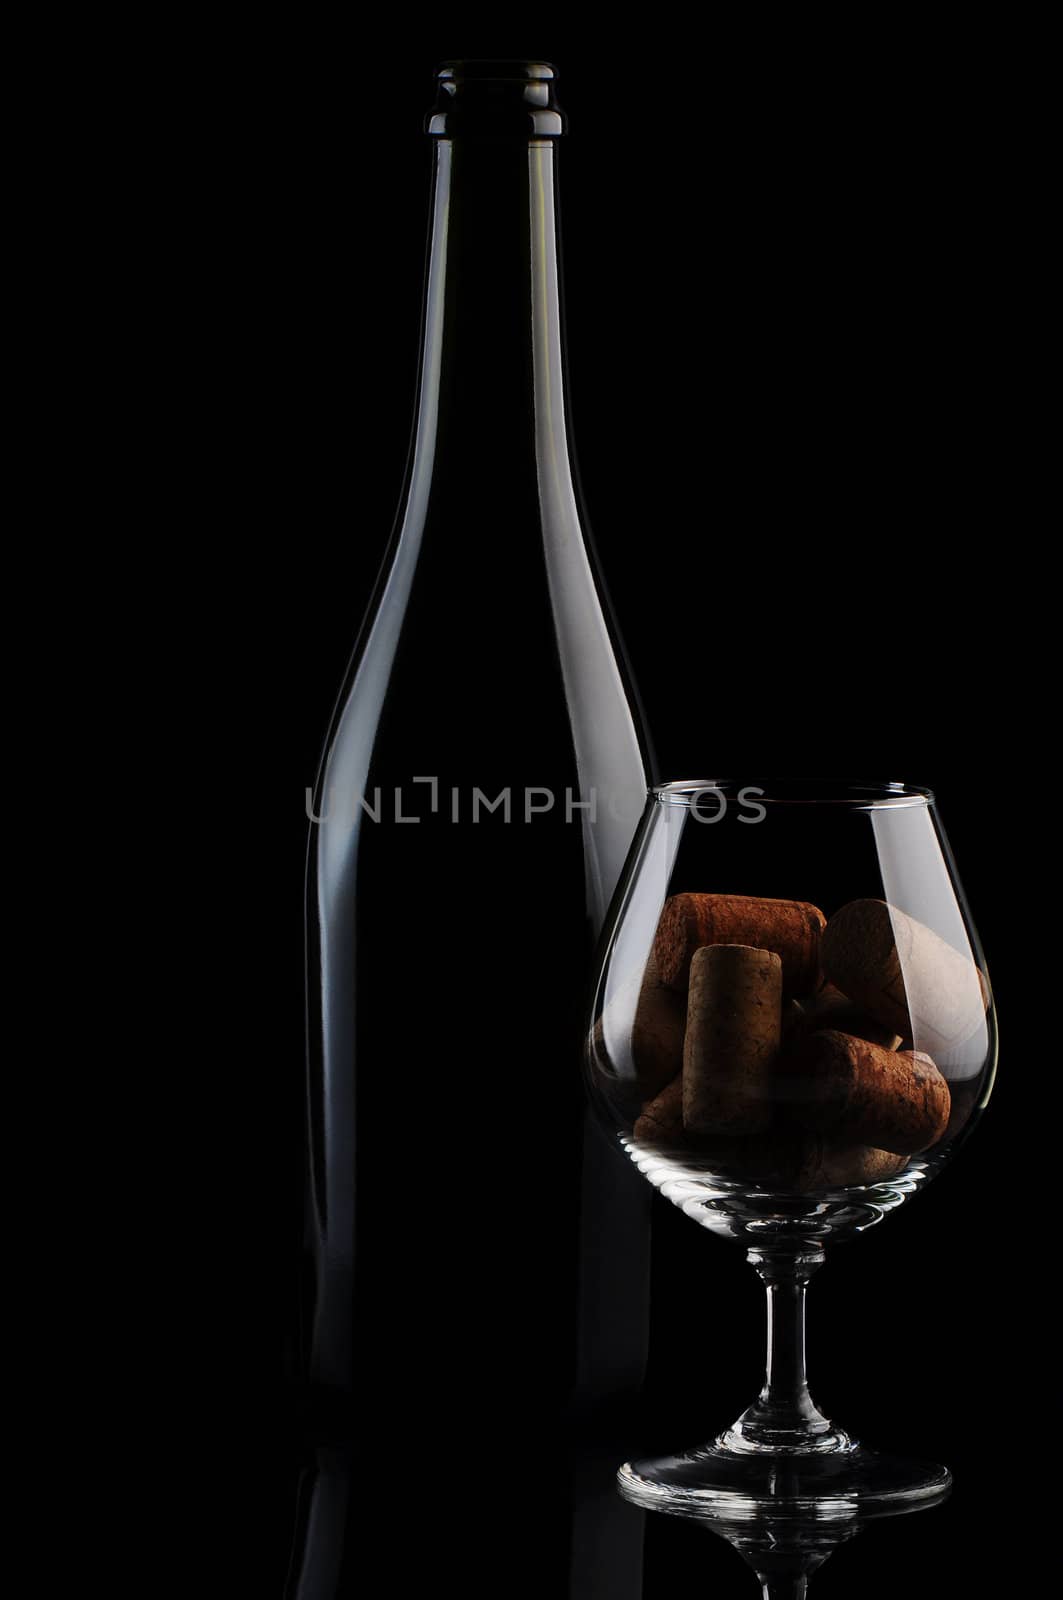 Cork in a glass and wine bottle on black background